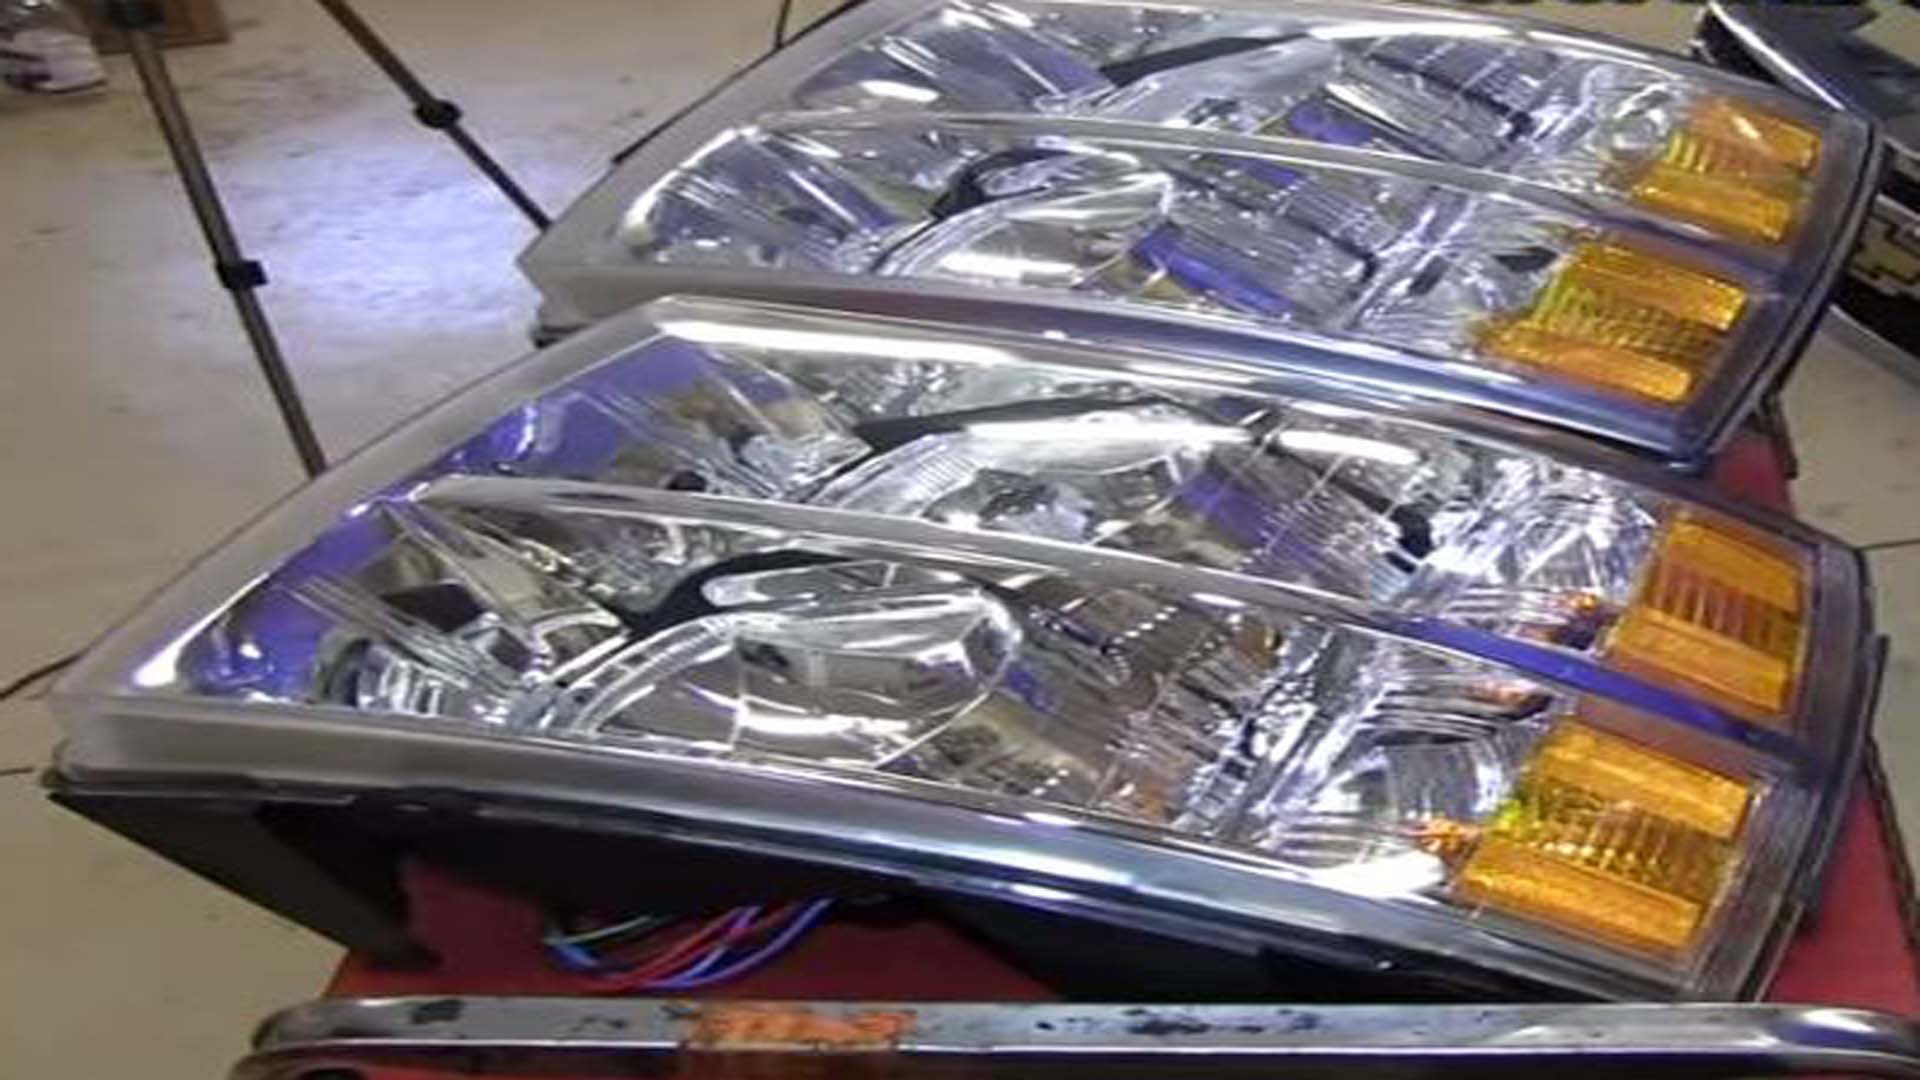 Chevrolet Silverado 2007-2013: How to Replace Headlight Bulb and